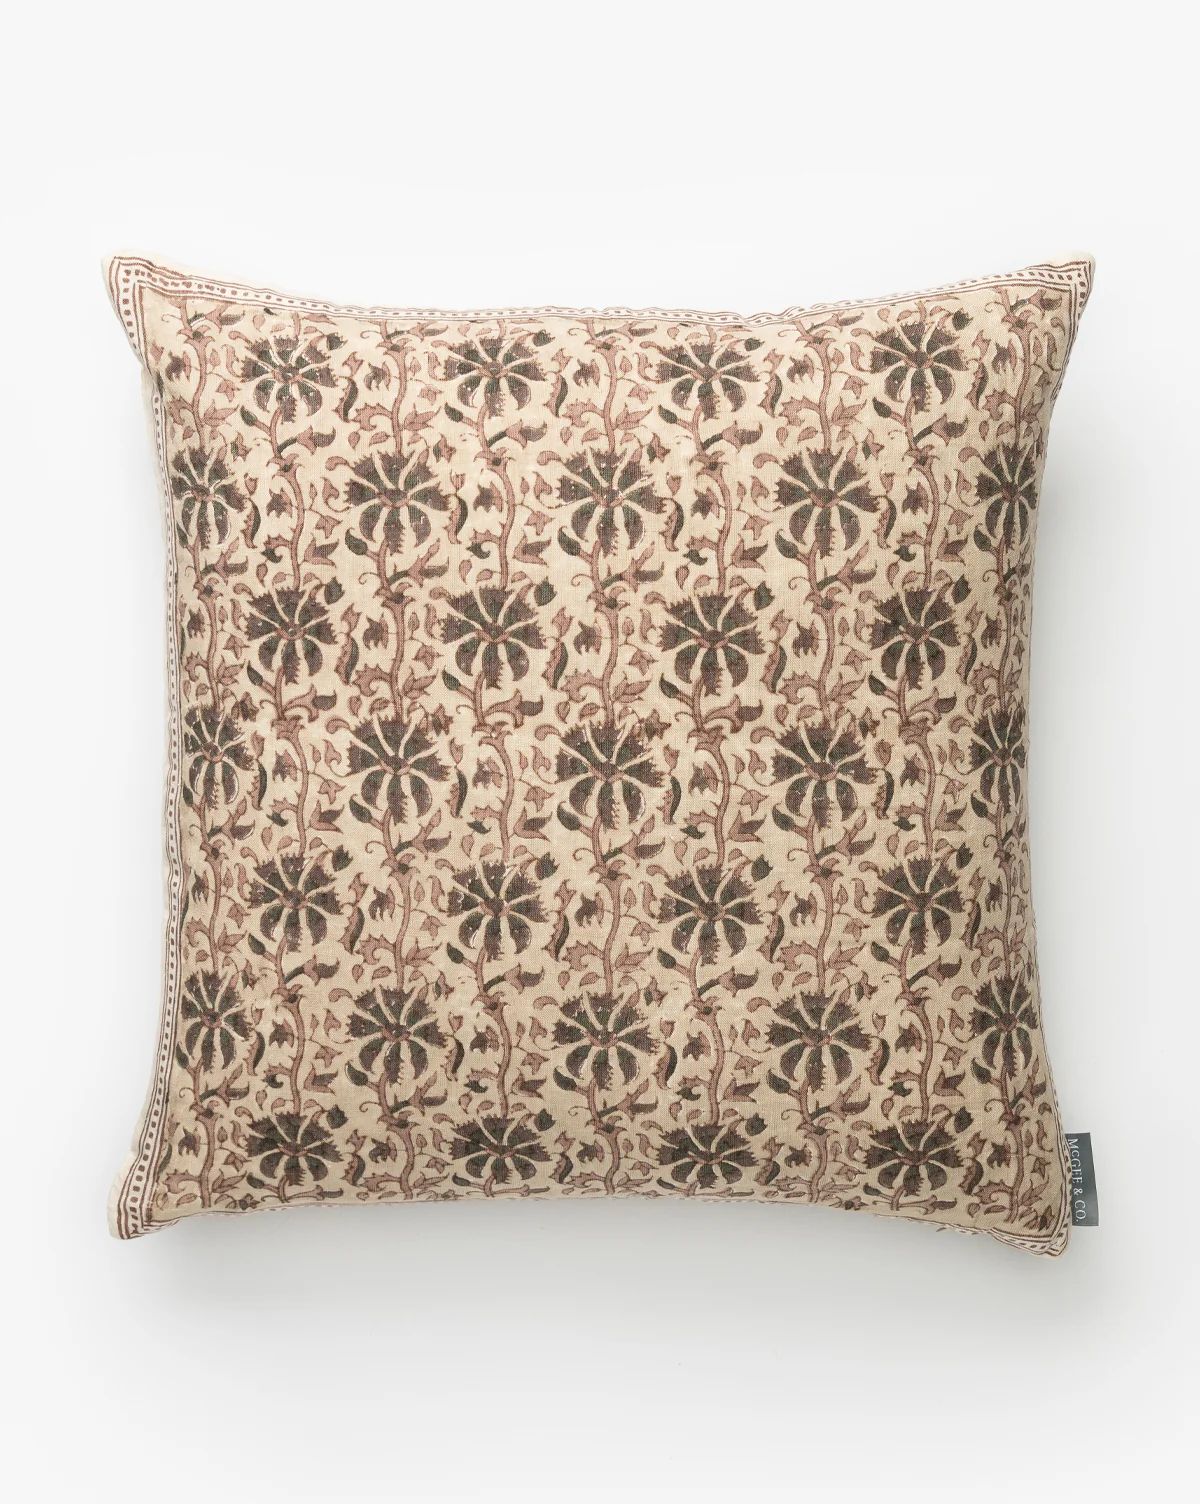 Lafayette Pillow Cover | McGee & Co.